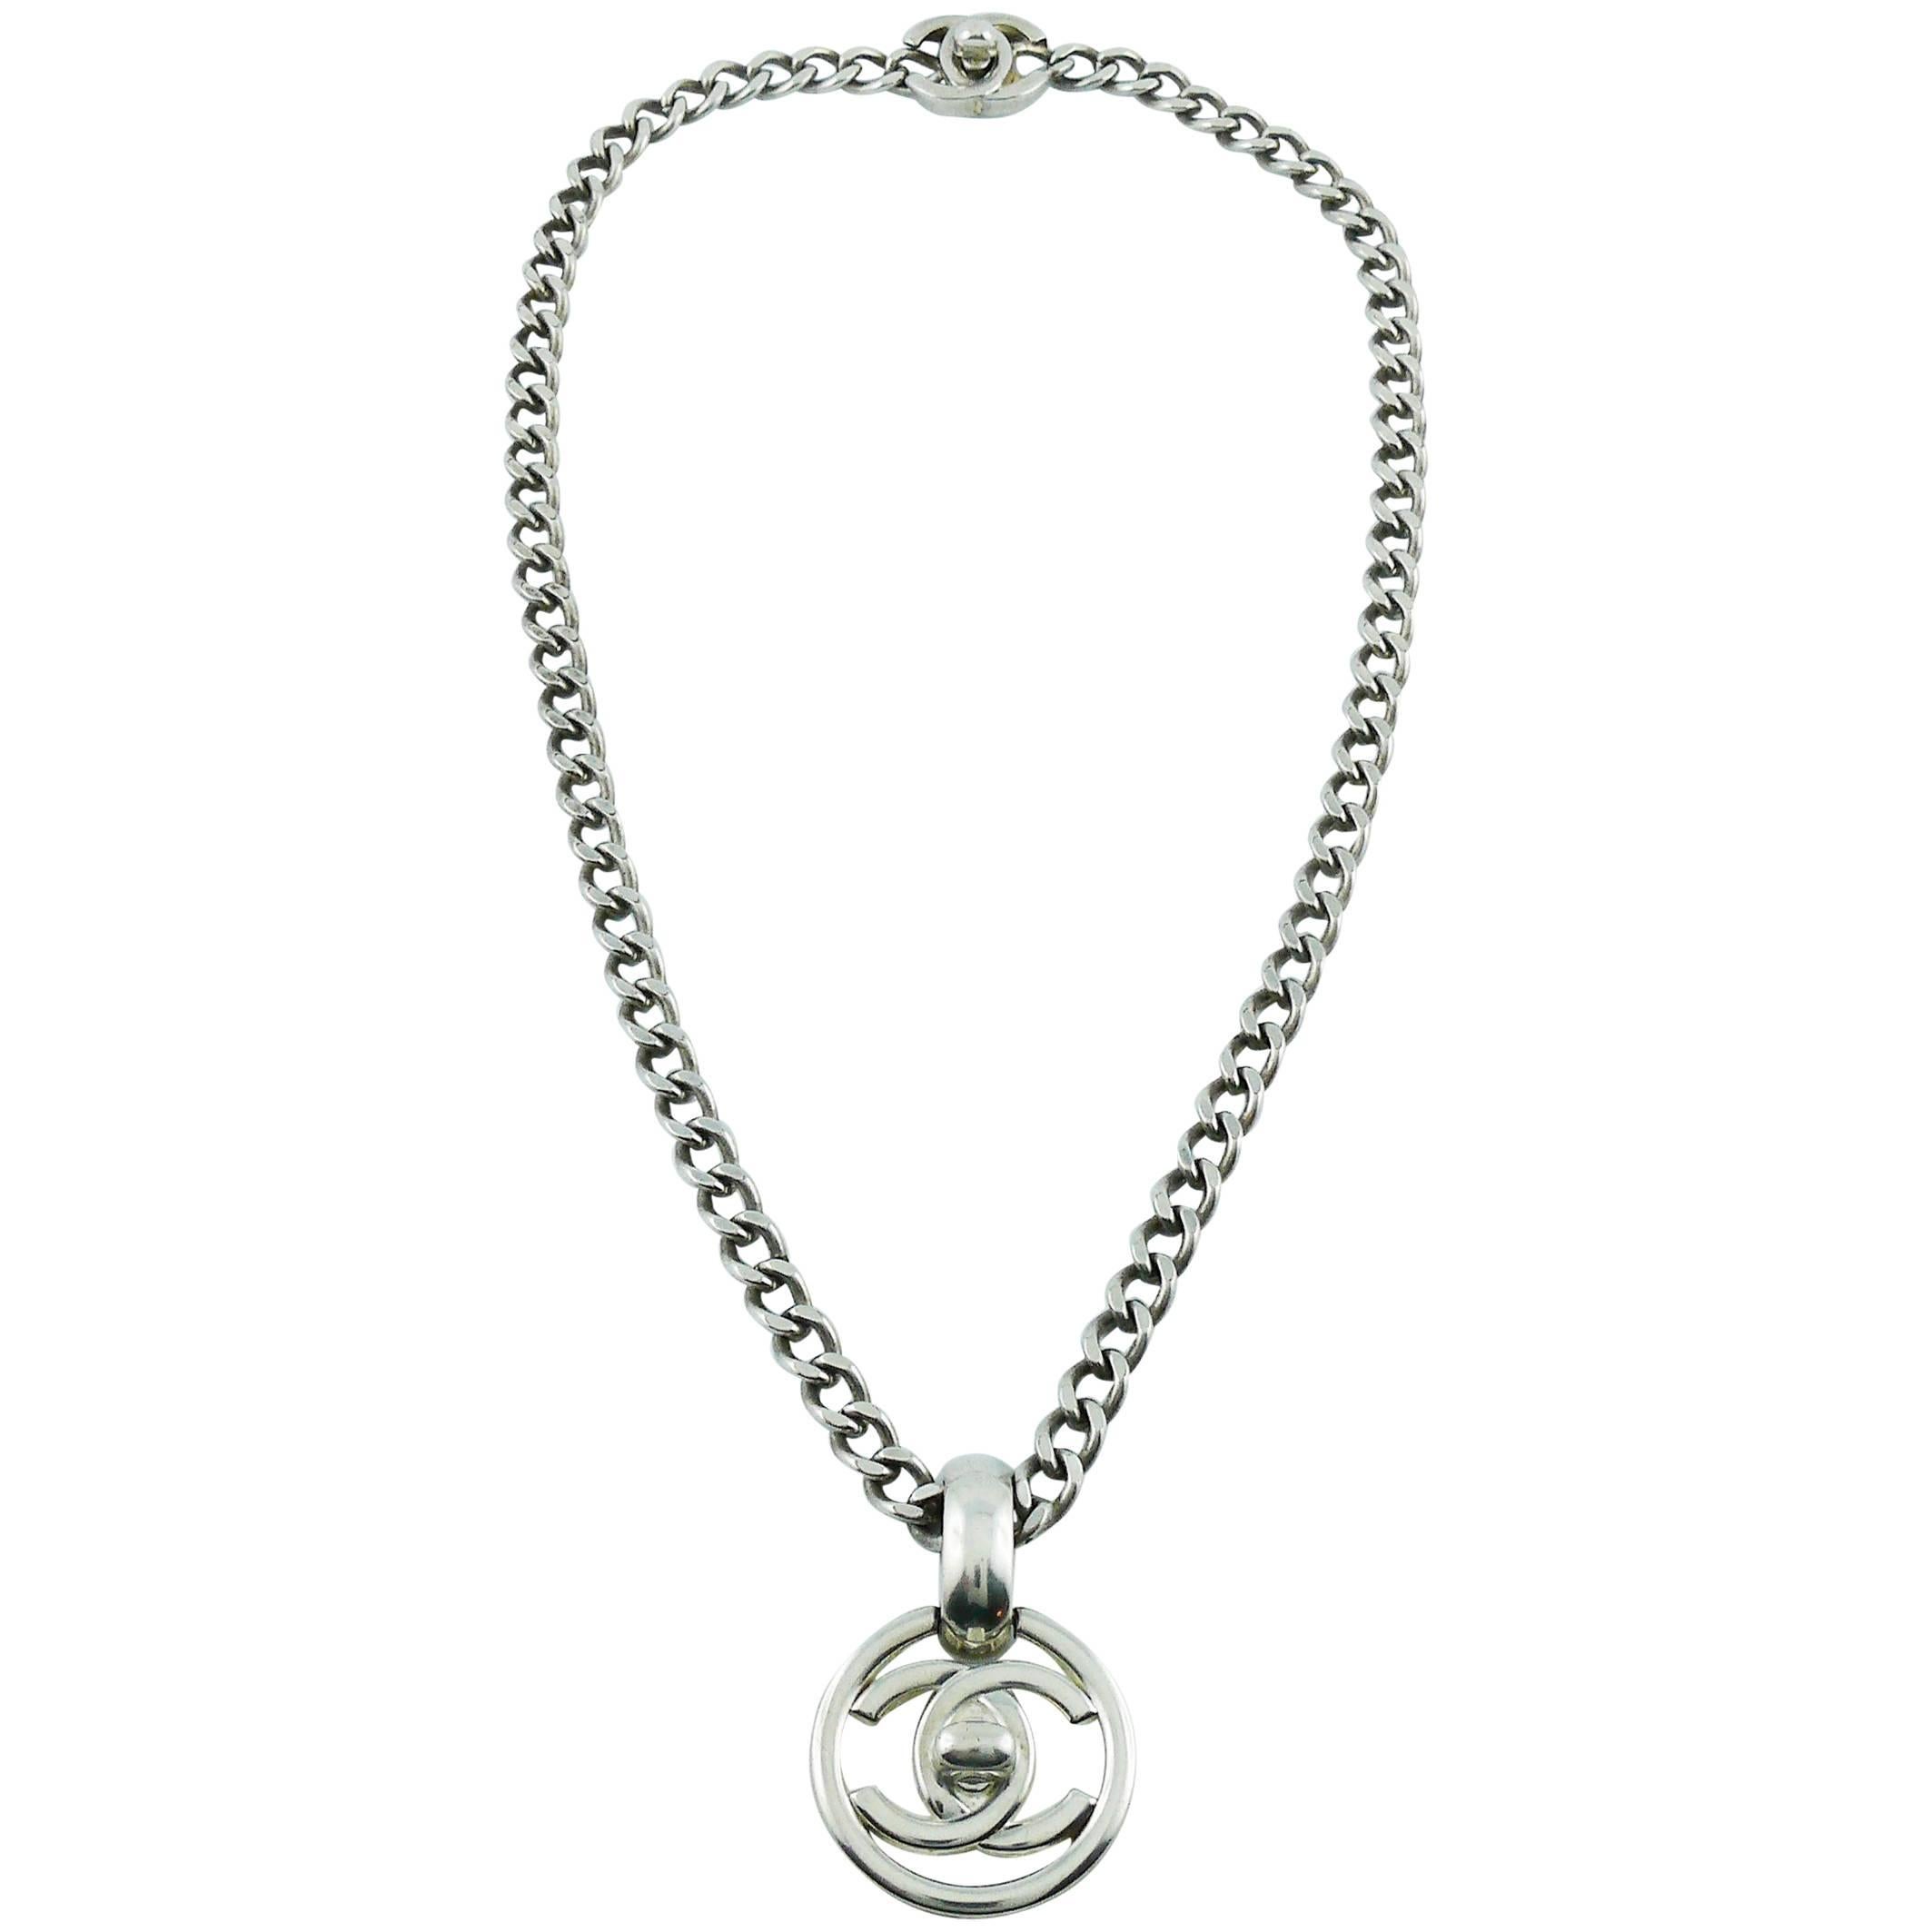 Chanel Vintage 1997 Silver Toned Turn-Lock Pendant Necklace at